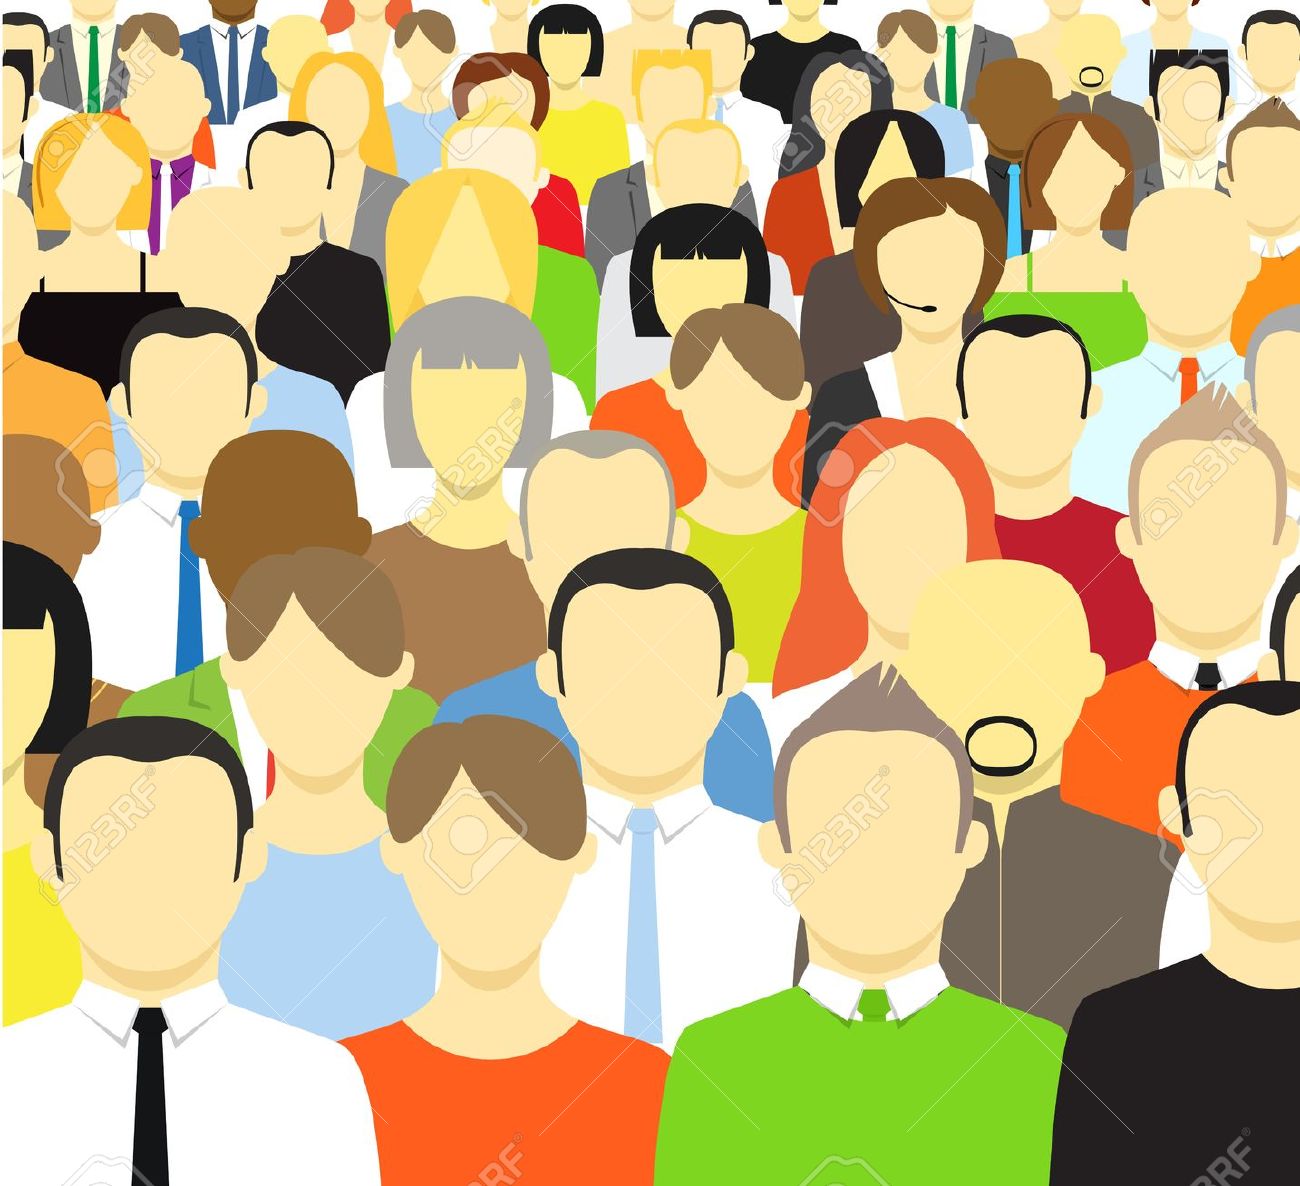 audience clipart - Crowd Clipart